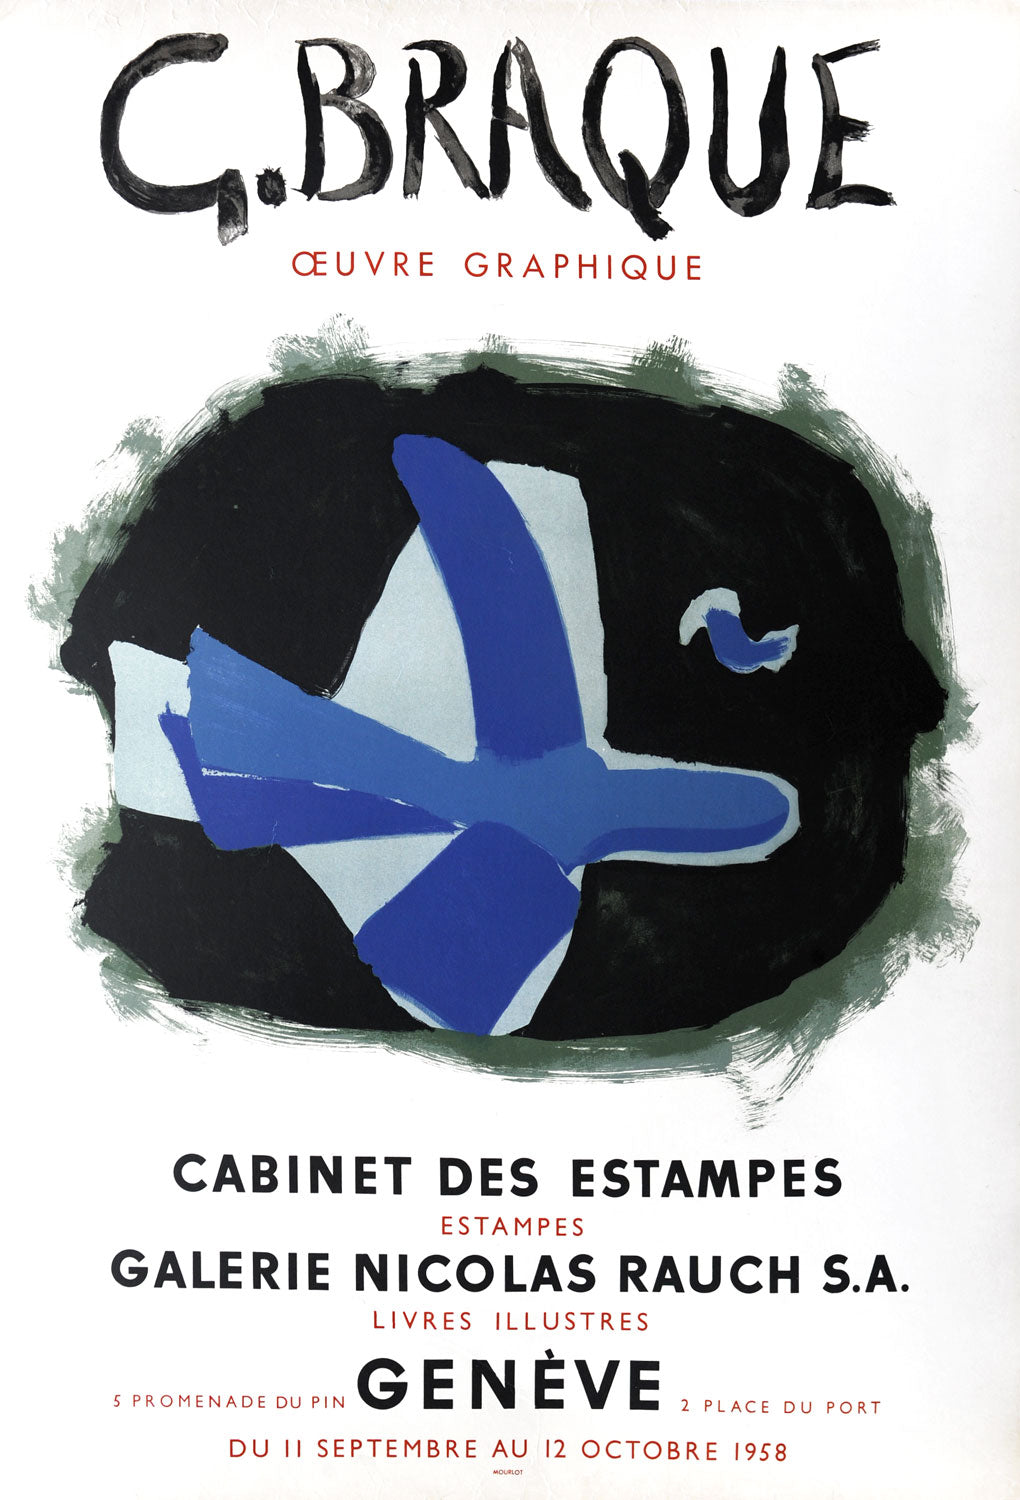 Oeuvre Graphique